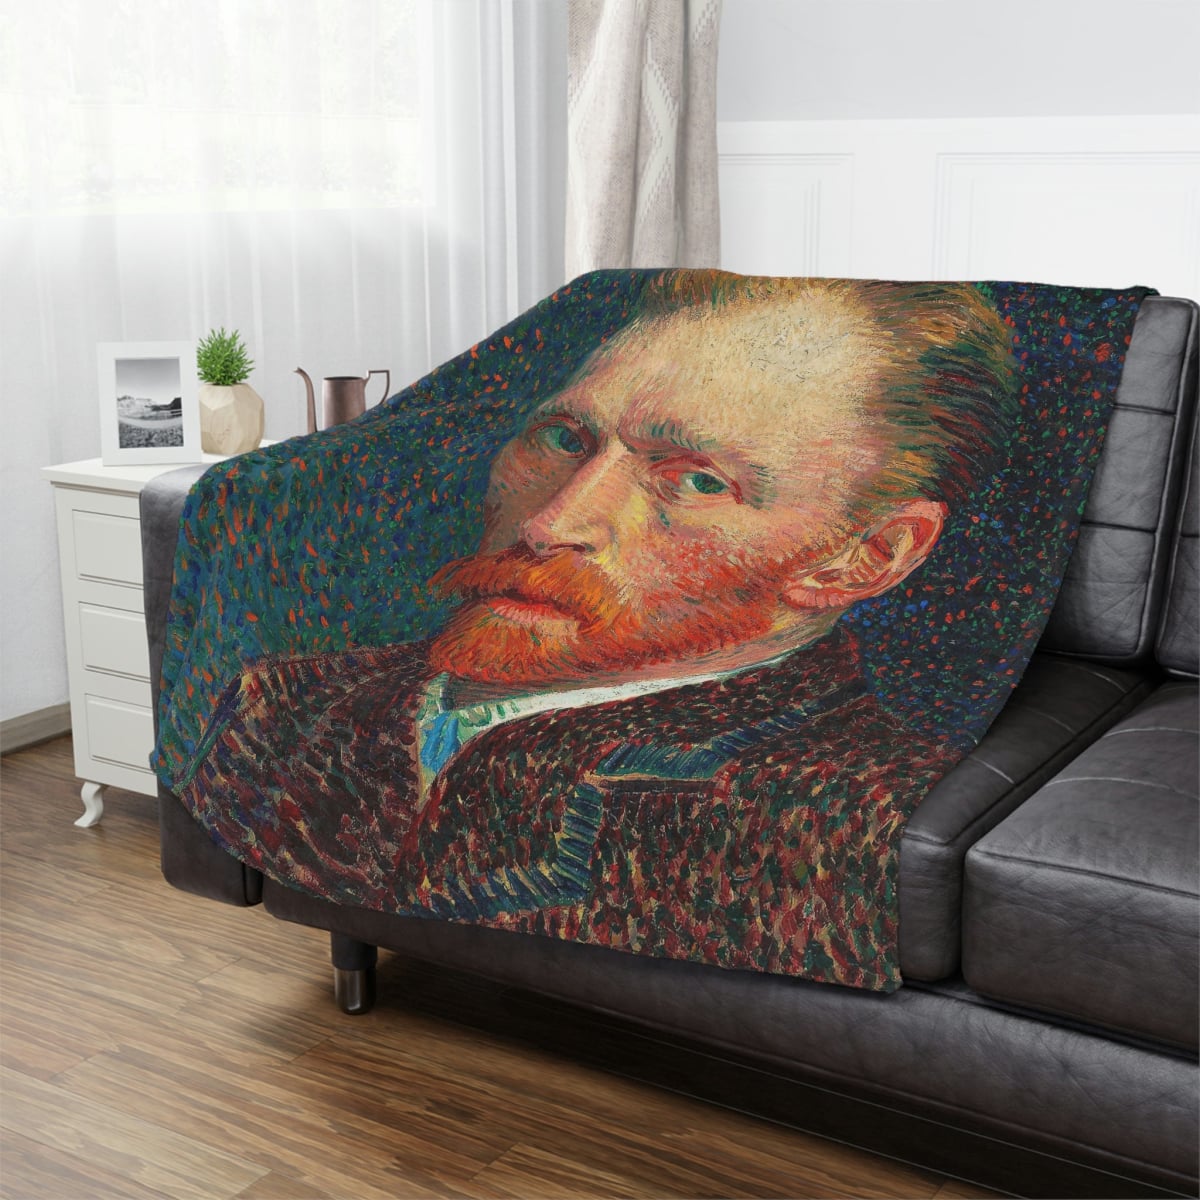 Iconic Artwork Decor - Stylish Bed and Couch Accessory